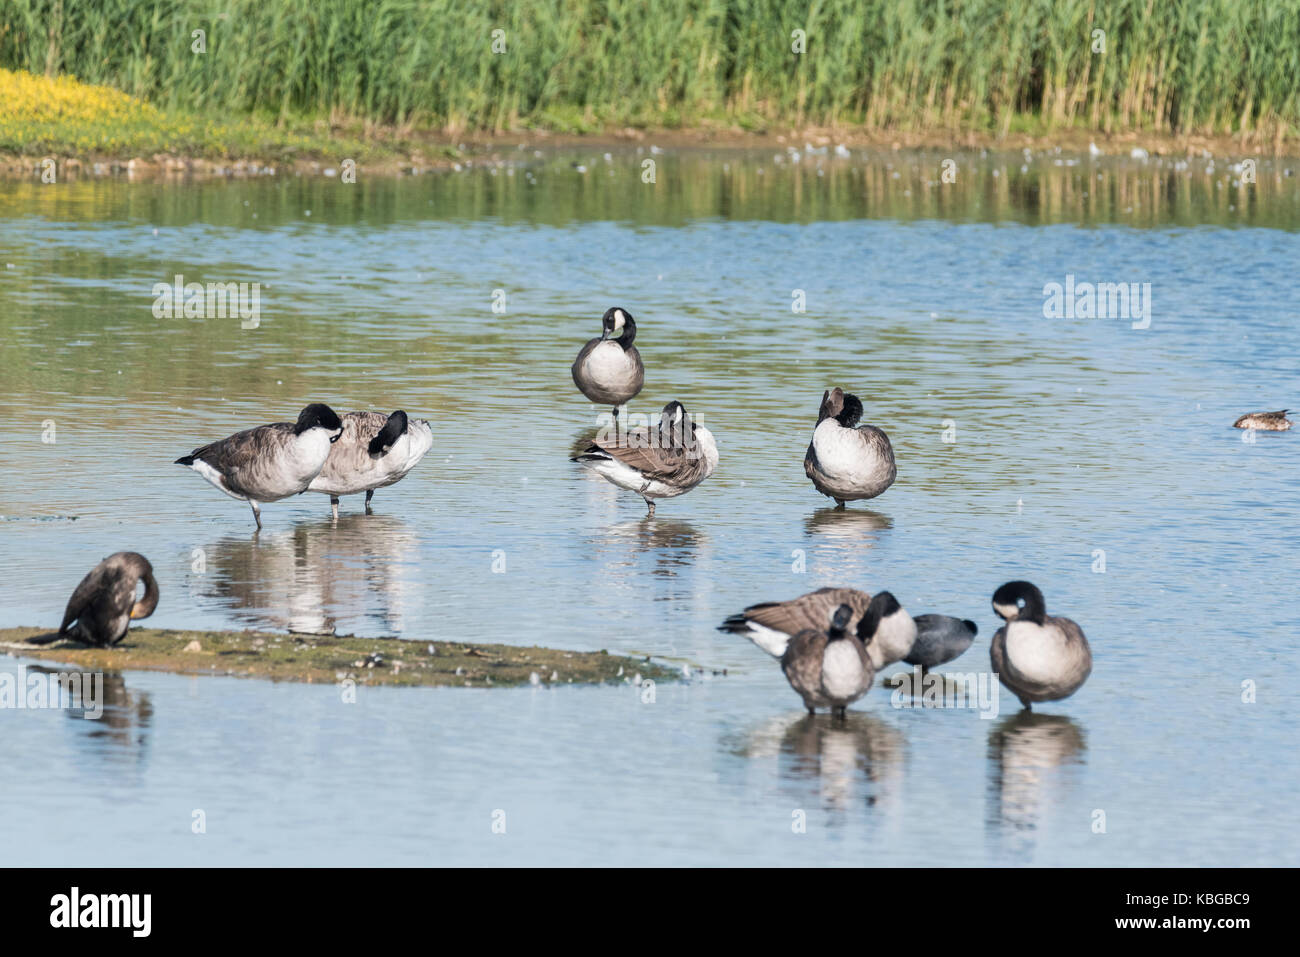 A small flock on Canada Geese (Branta canadensis) in water Stock Photo